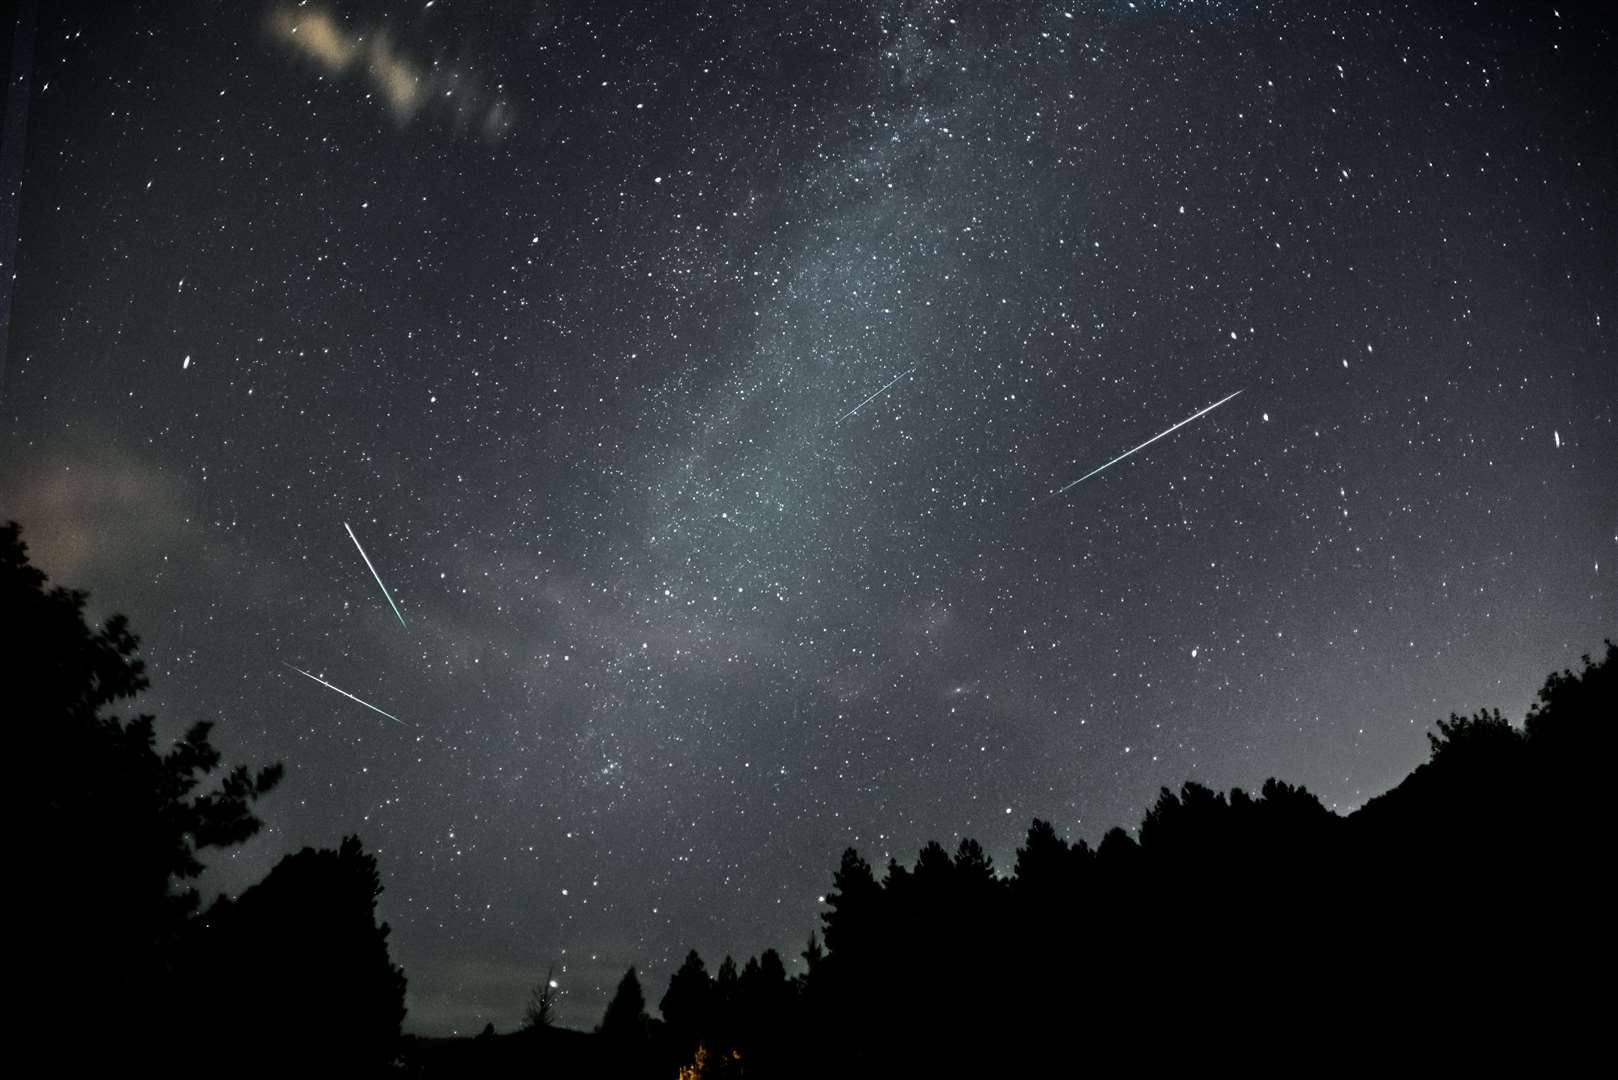 The Perseid meteor shower began in late July and is expected to peak around August 12